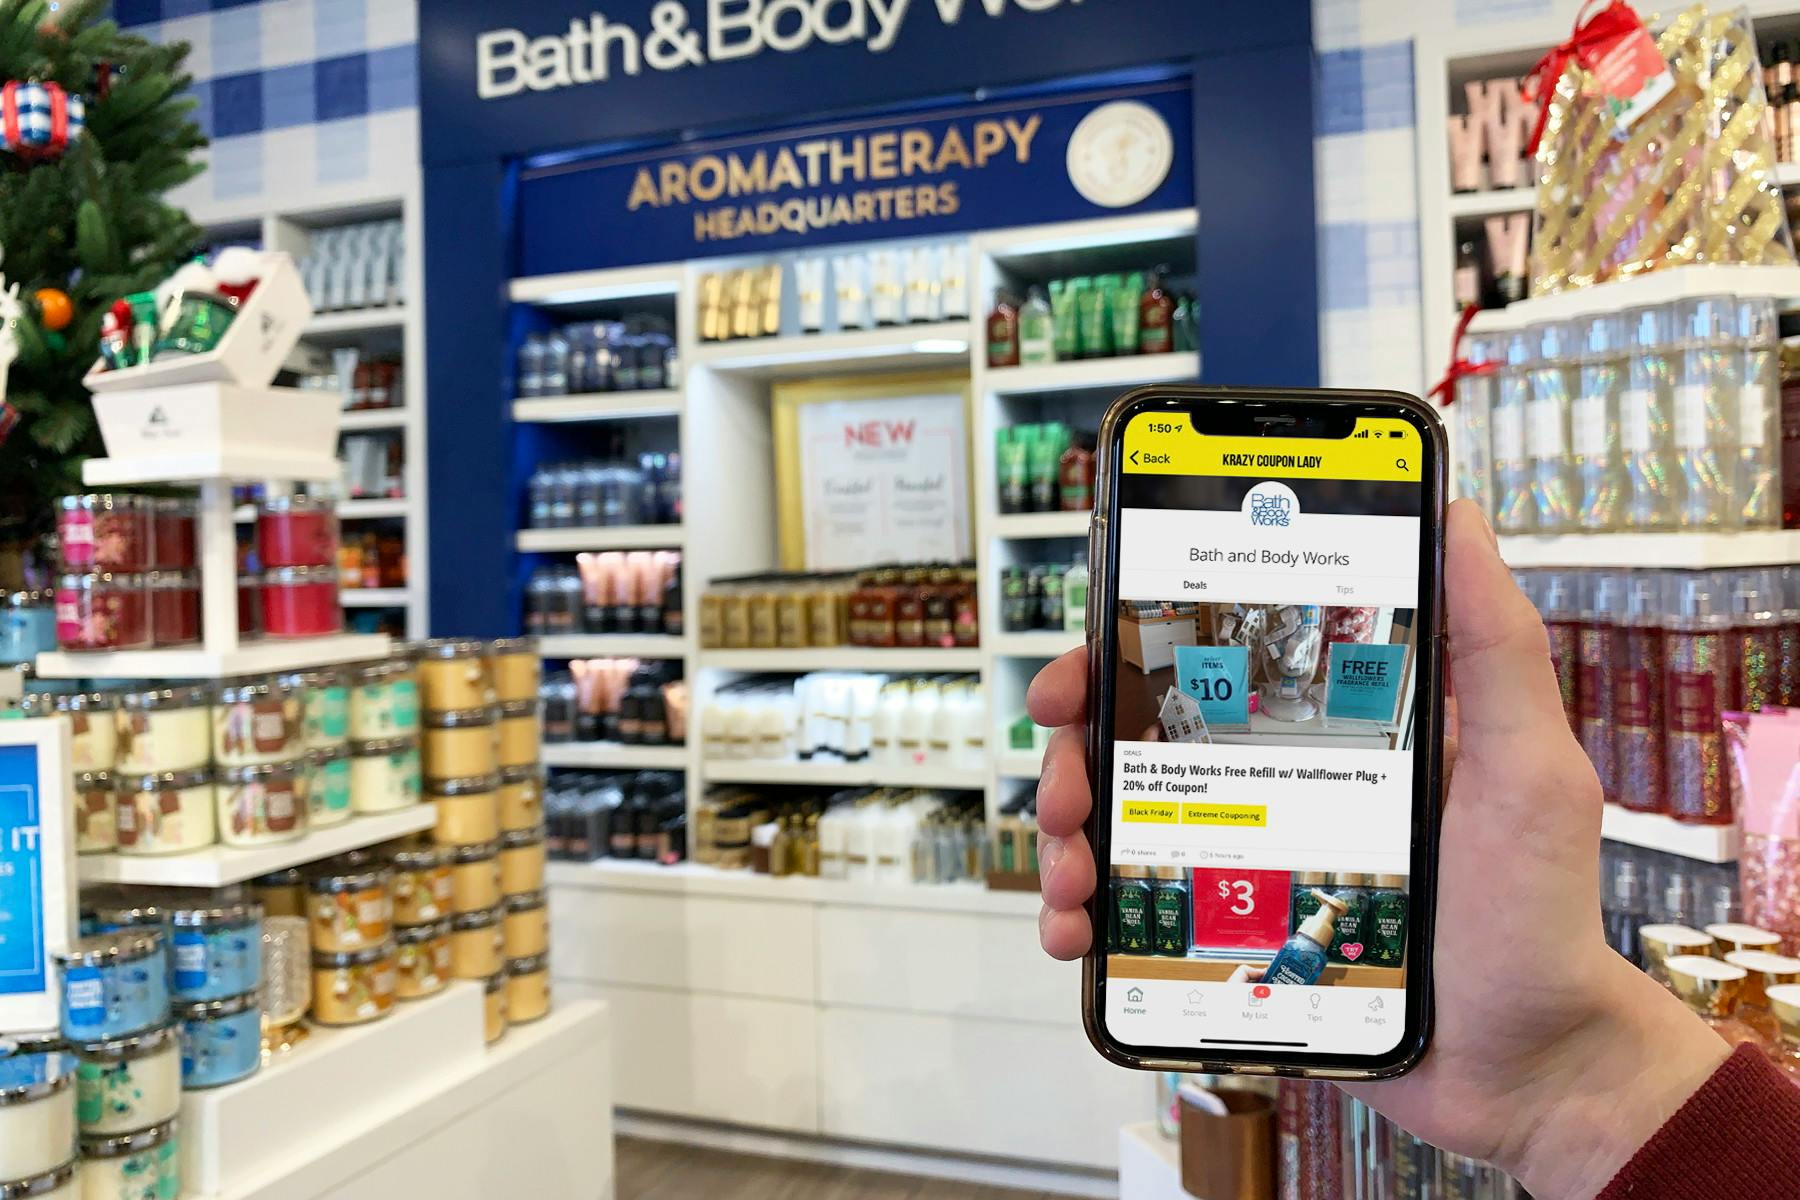 A person's hand holding up a cell phone displaying the KCL app's Bath & Body Works page inside a Bath & Body Works store.